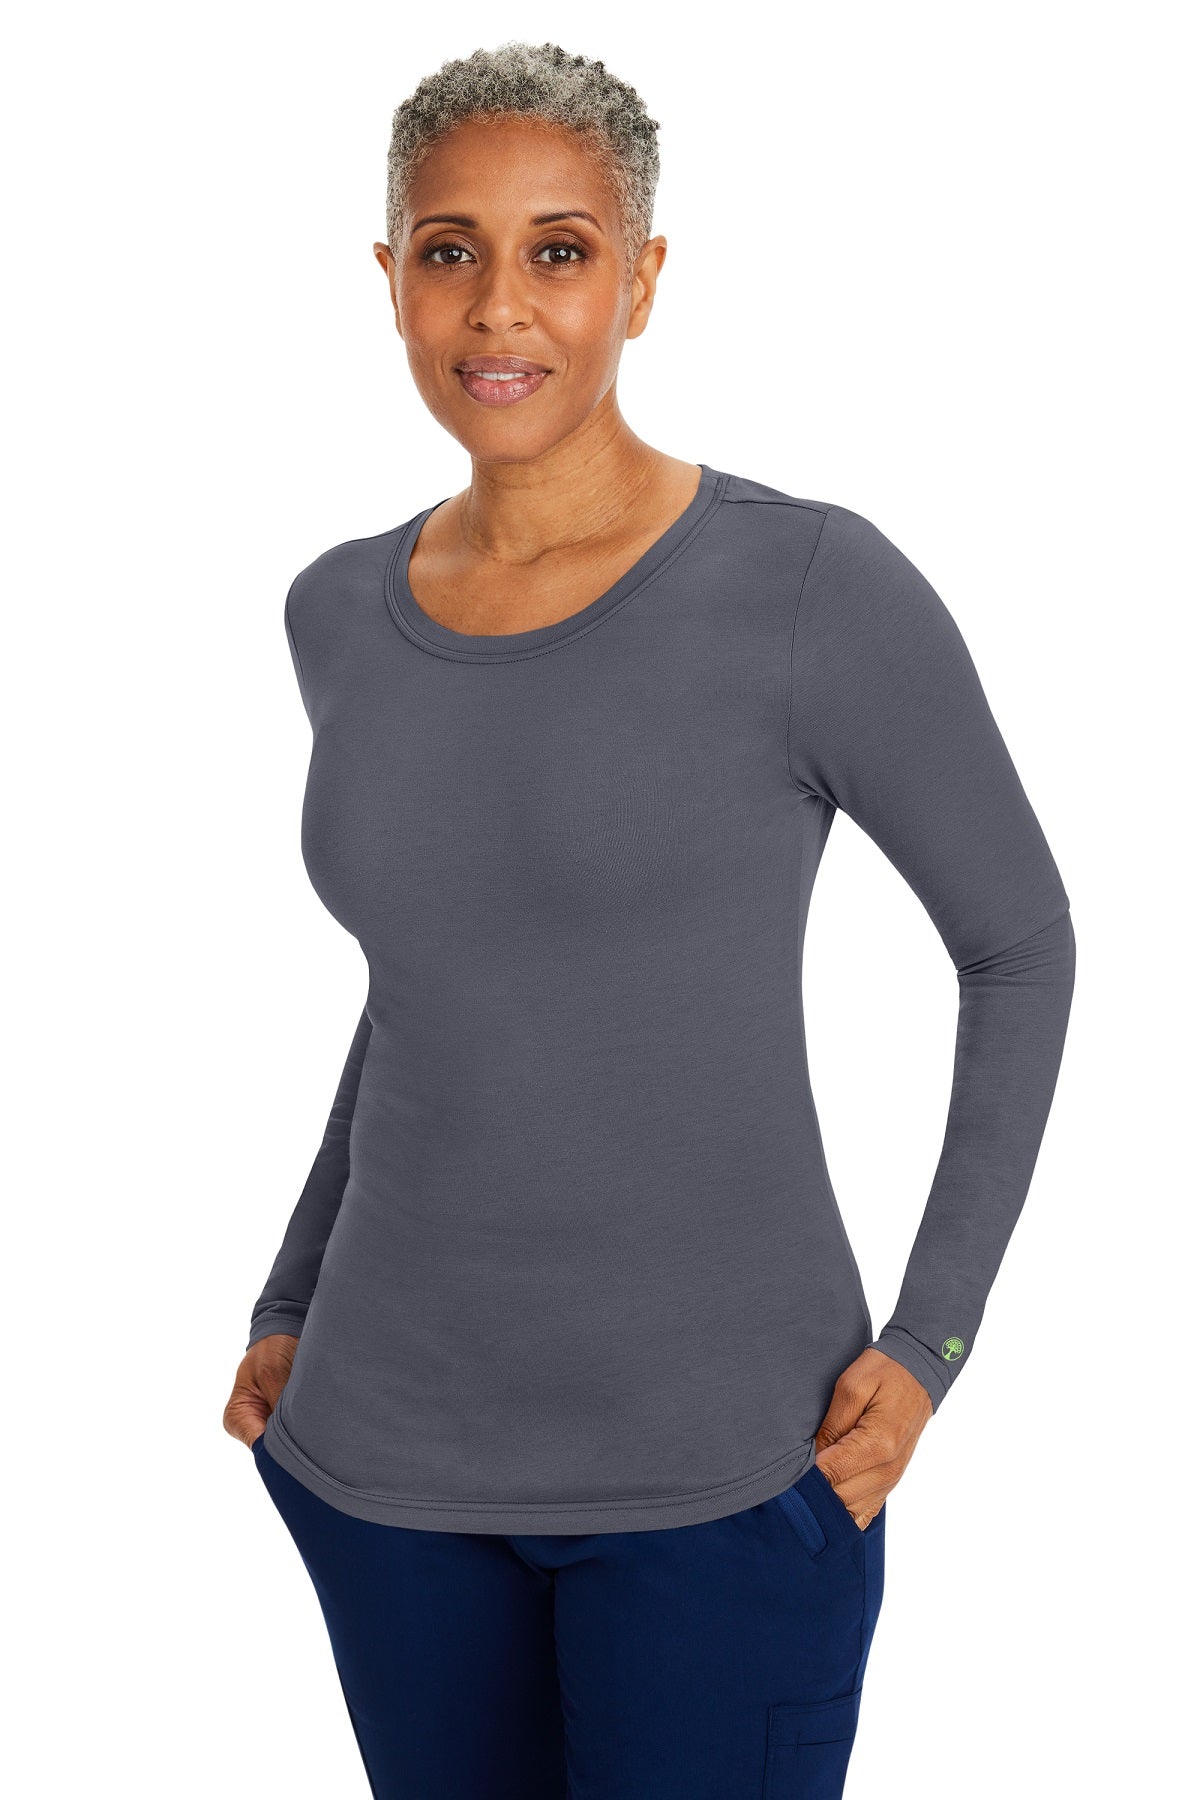 Healing Hands Purple Label Melissa Long Sleeve Tee in Pewter at Parker's Clothing and Shoes.